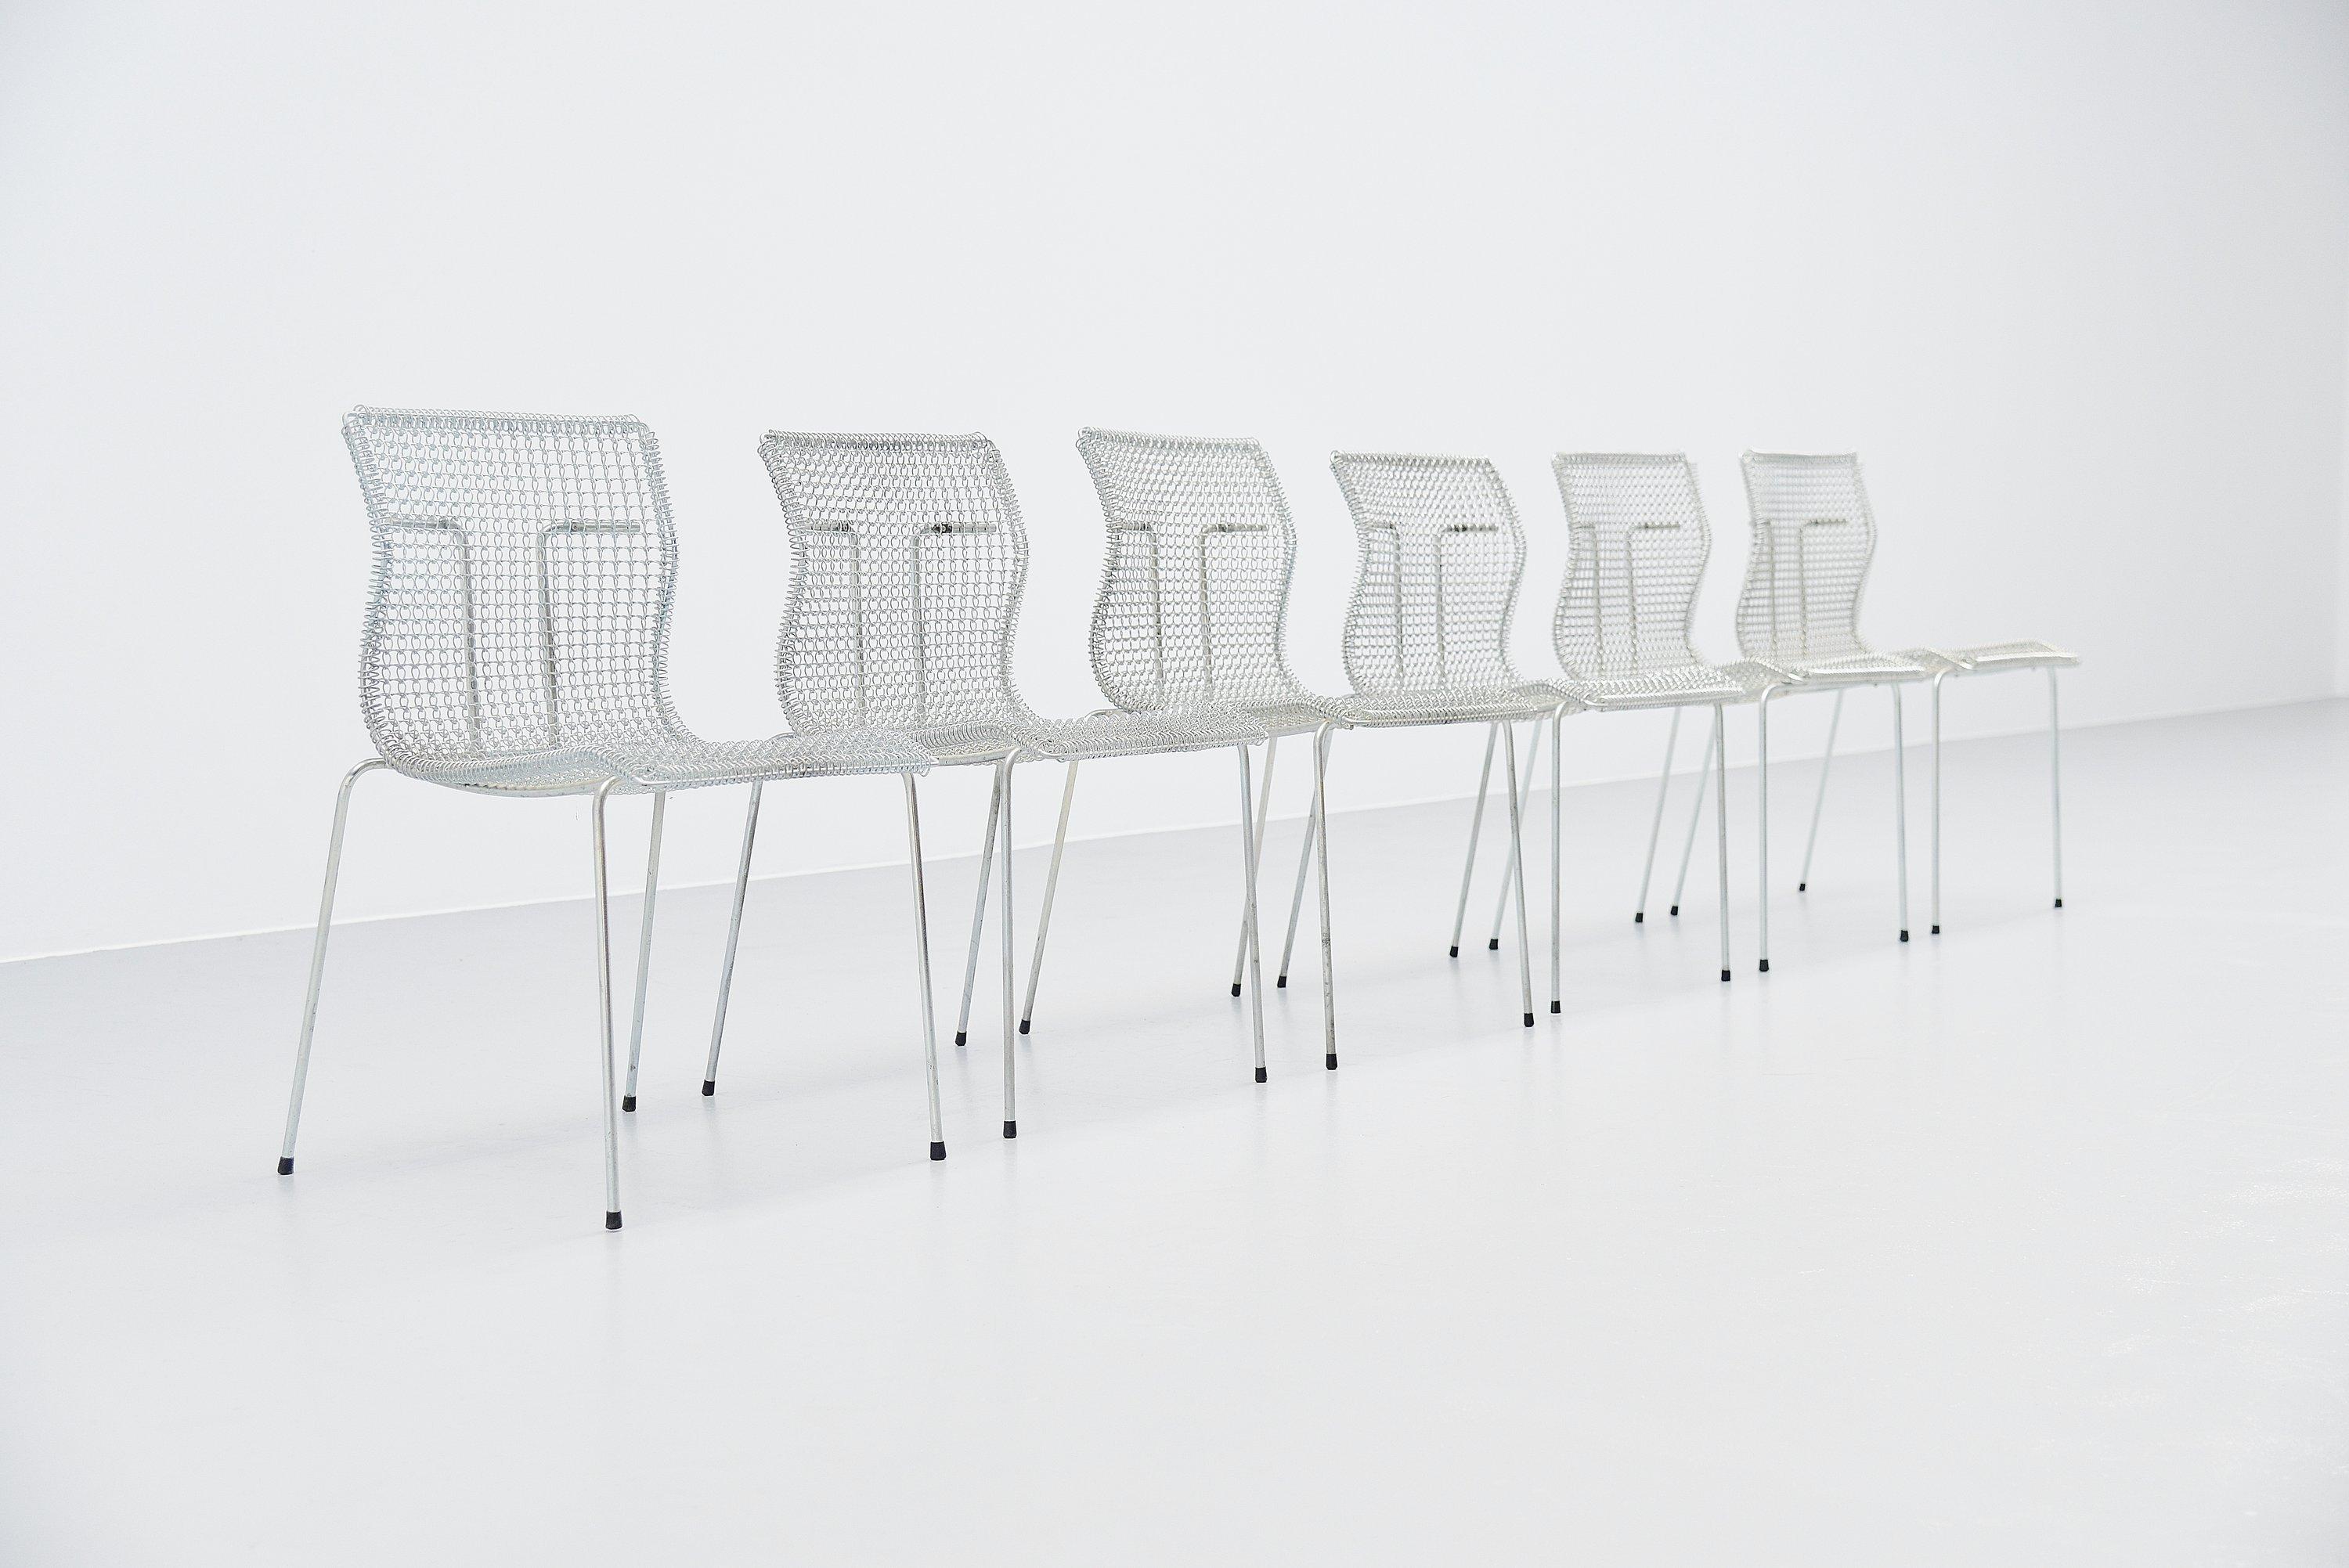 Set of so called 'Rascal' chairs designed by Niall O'Flynn and manufactured by 't Spectrum, Holland 1997. These chairs have a galvanized steel frame and spring seats. They look not comfortable, its everyone's first thought but they seat surprisingly